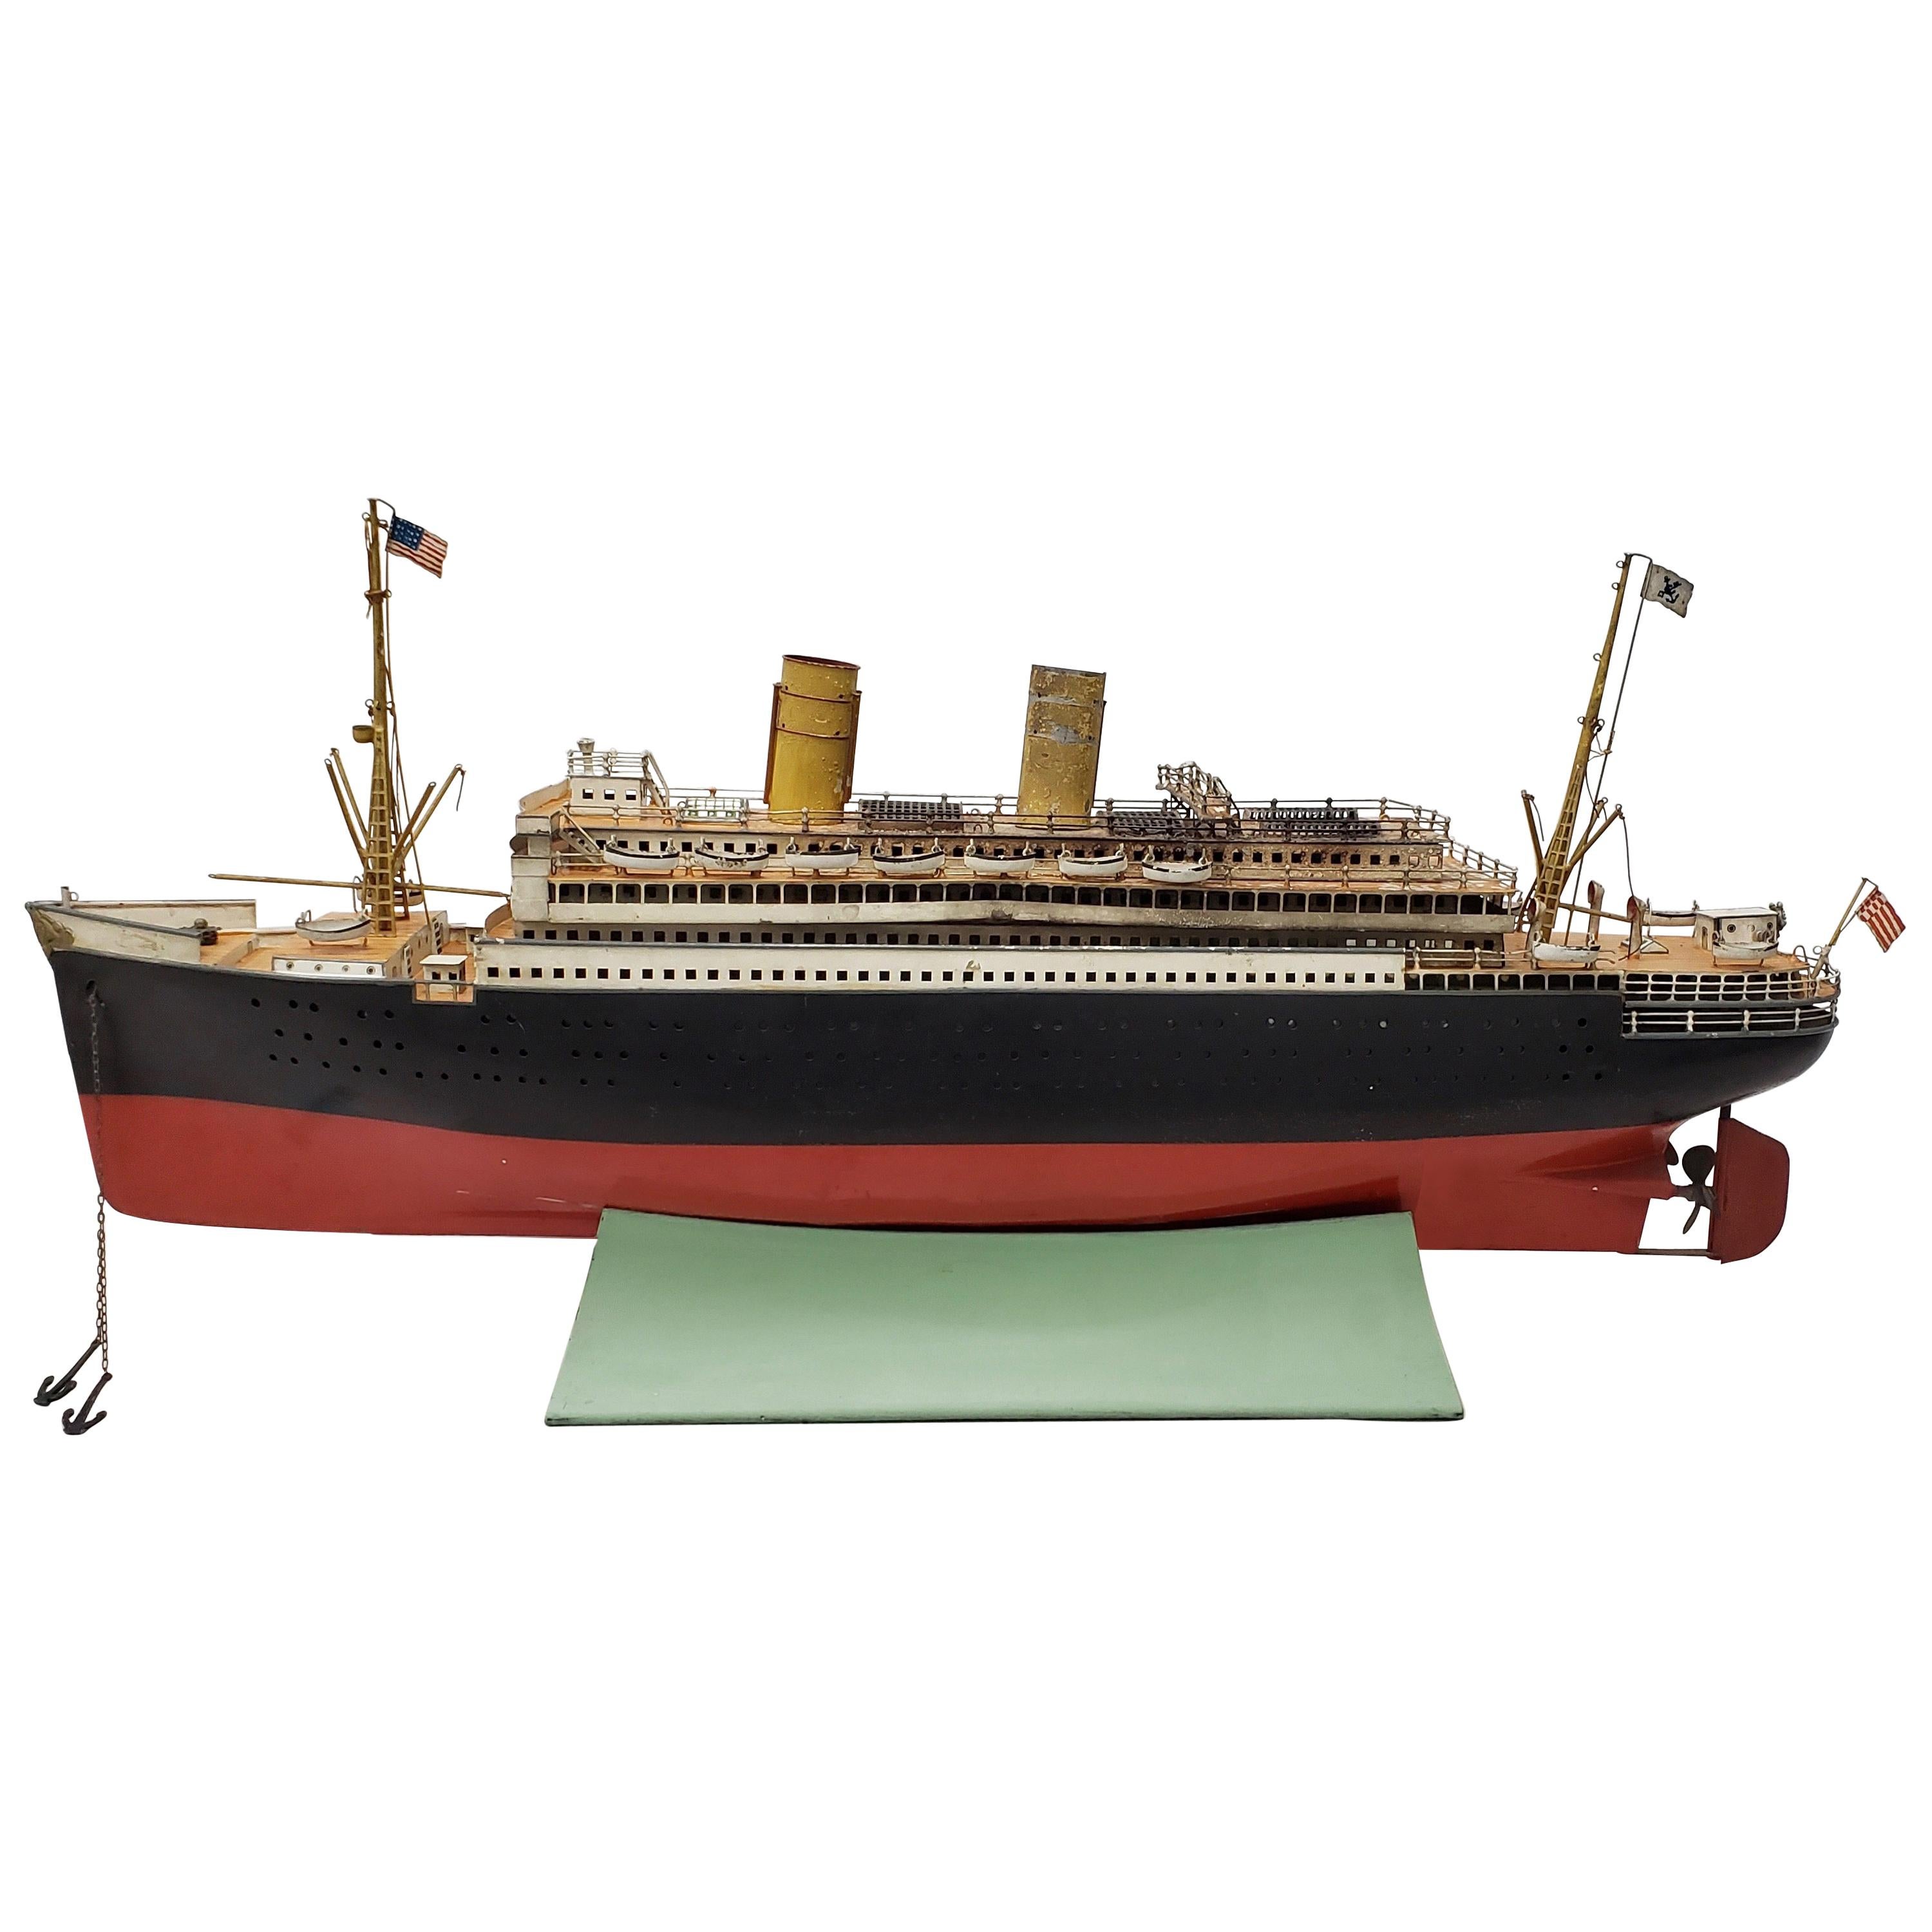 Antique Marklin Ocean Liner with American Flags and Lifeboats, circa 1900 For Sale